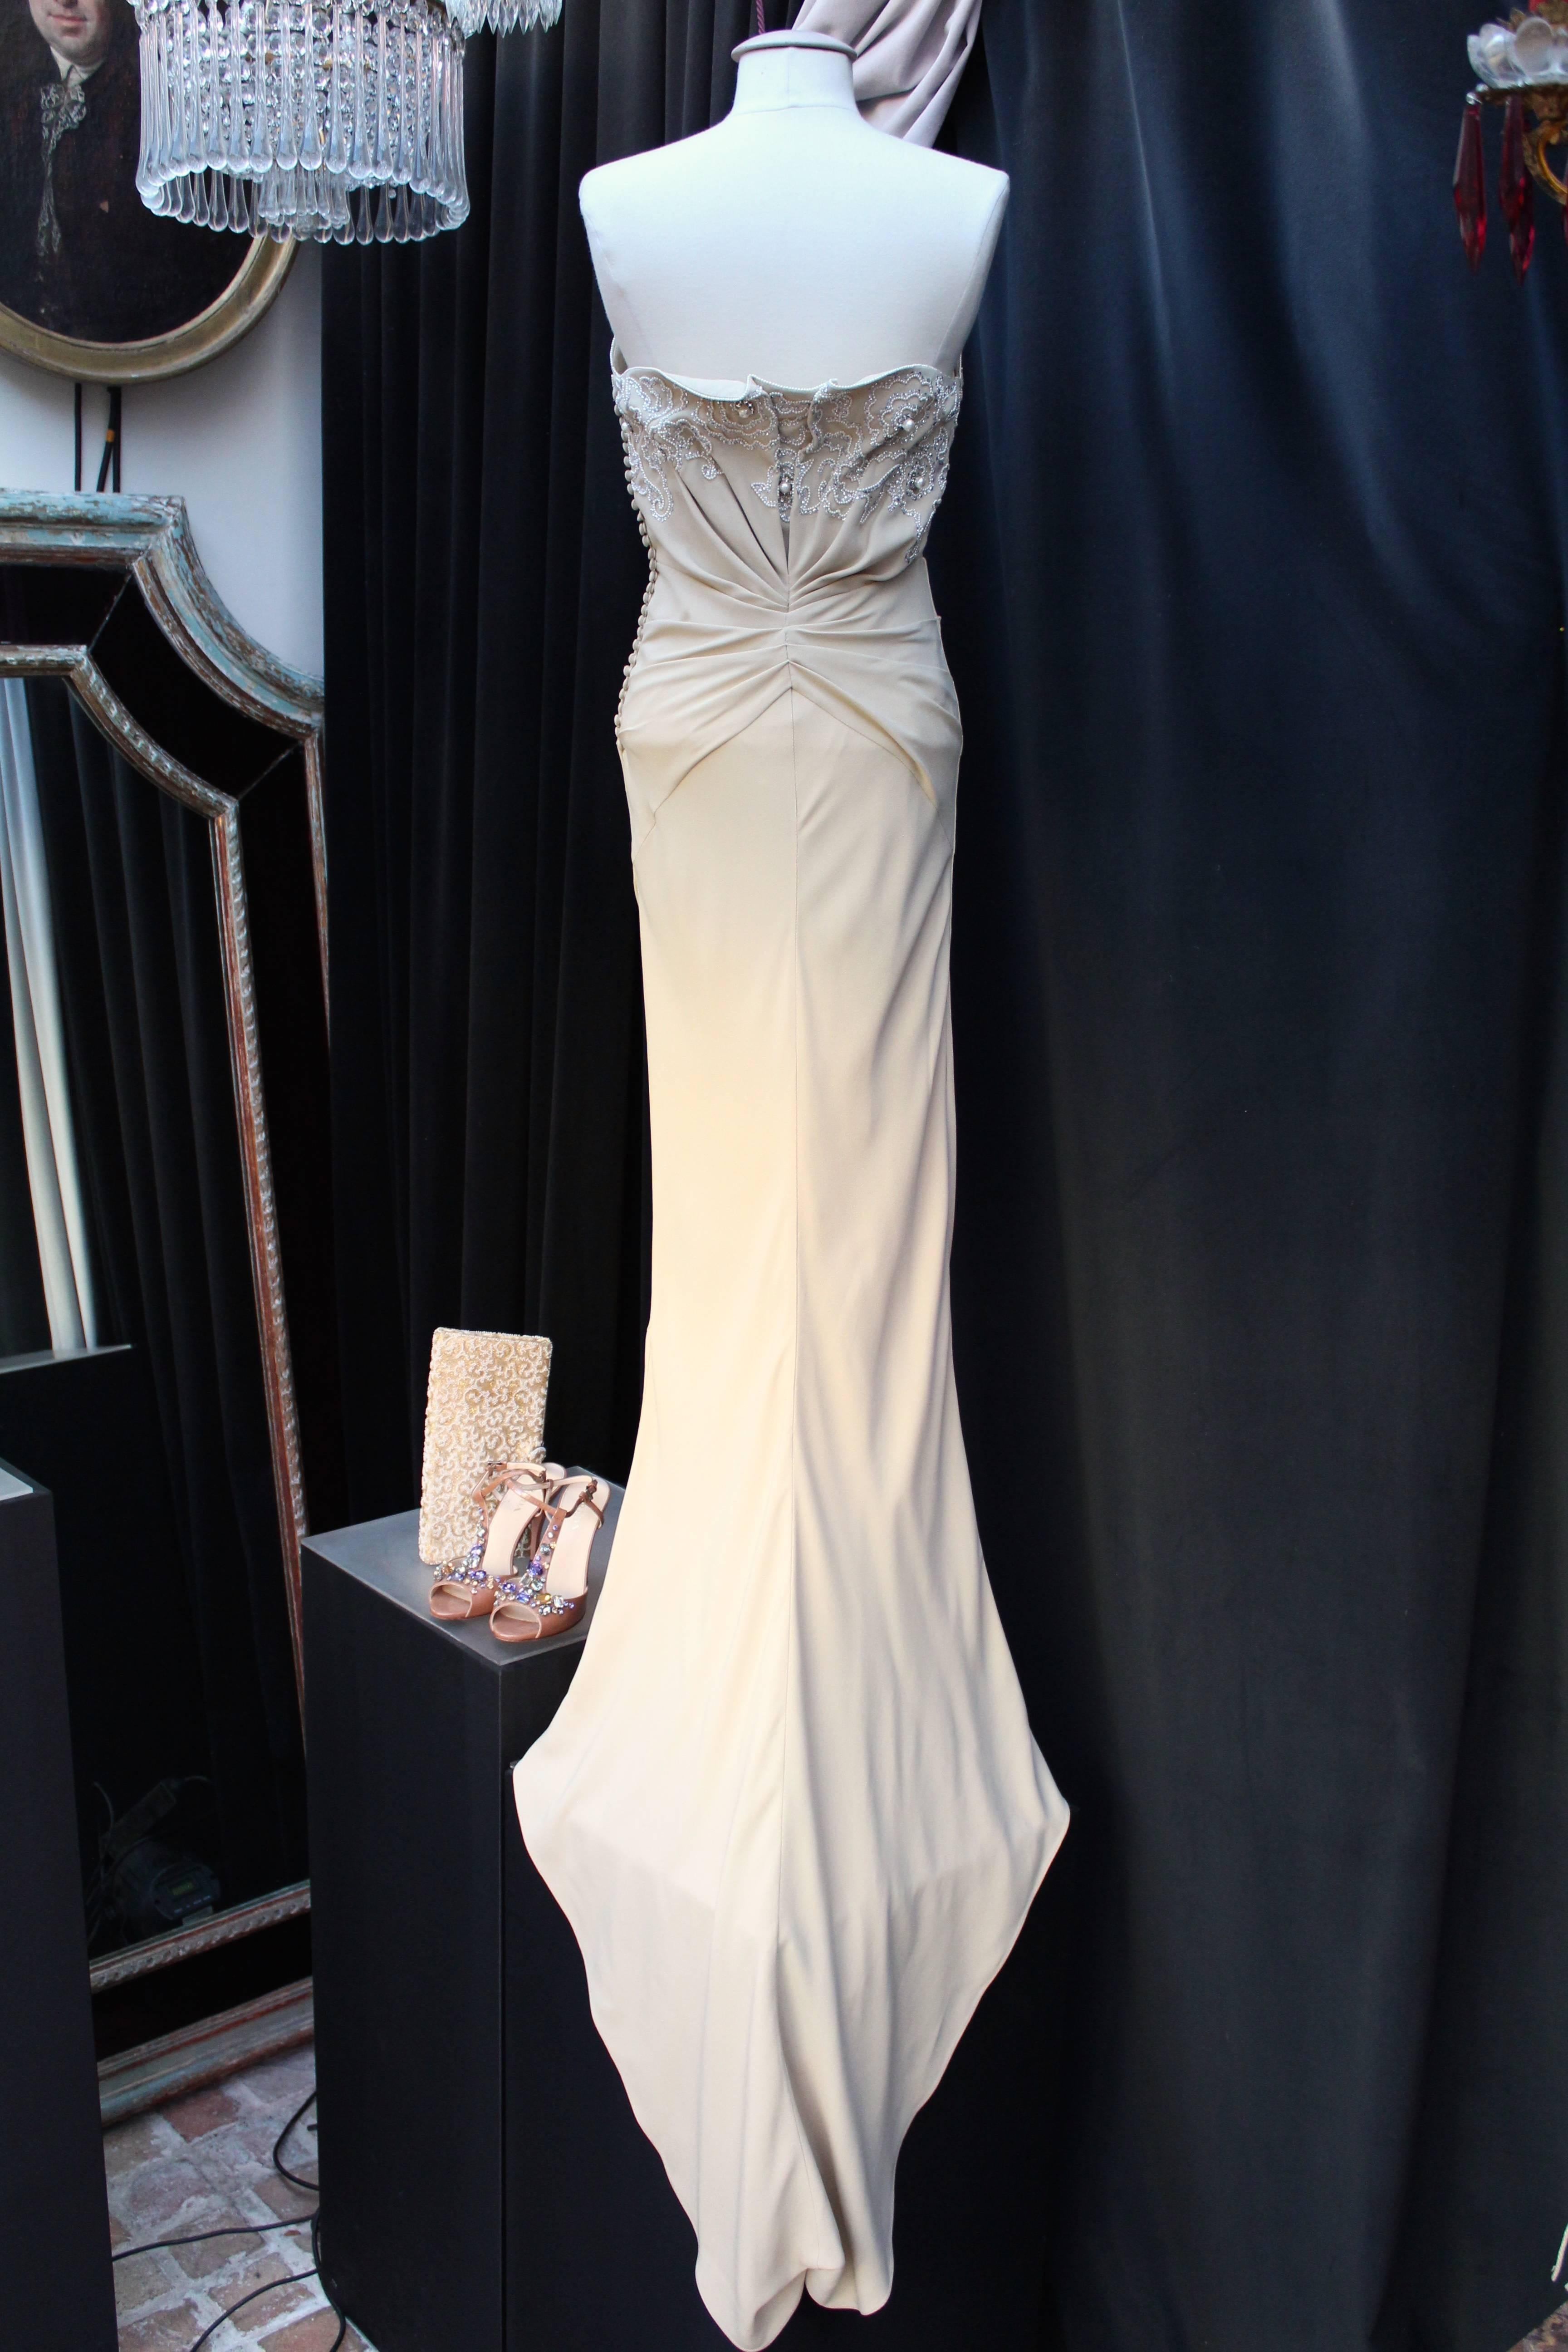 CHRISTIAN DIOR PARIS (Made in France) Long pencil asymmetrical draped gown in ivory/sand/beige silk embroidered on the bustier with imitation pearls and silver sequins in a floral design.

The sleeveless dress is from the Ready-to-Wear 2008 Spring